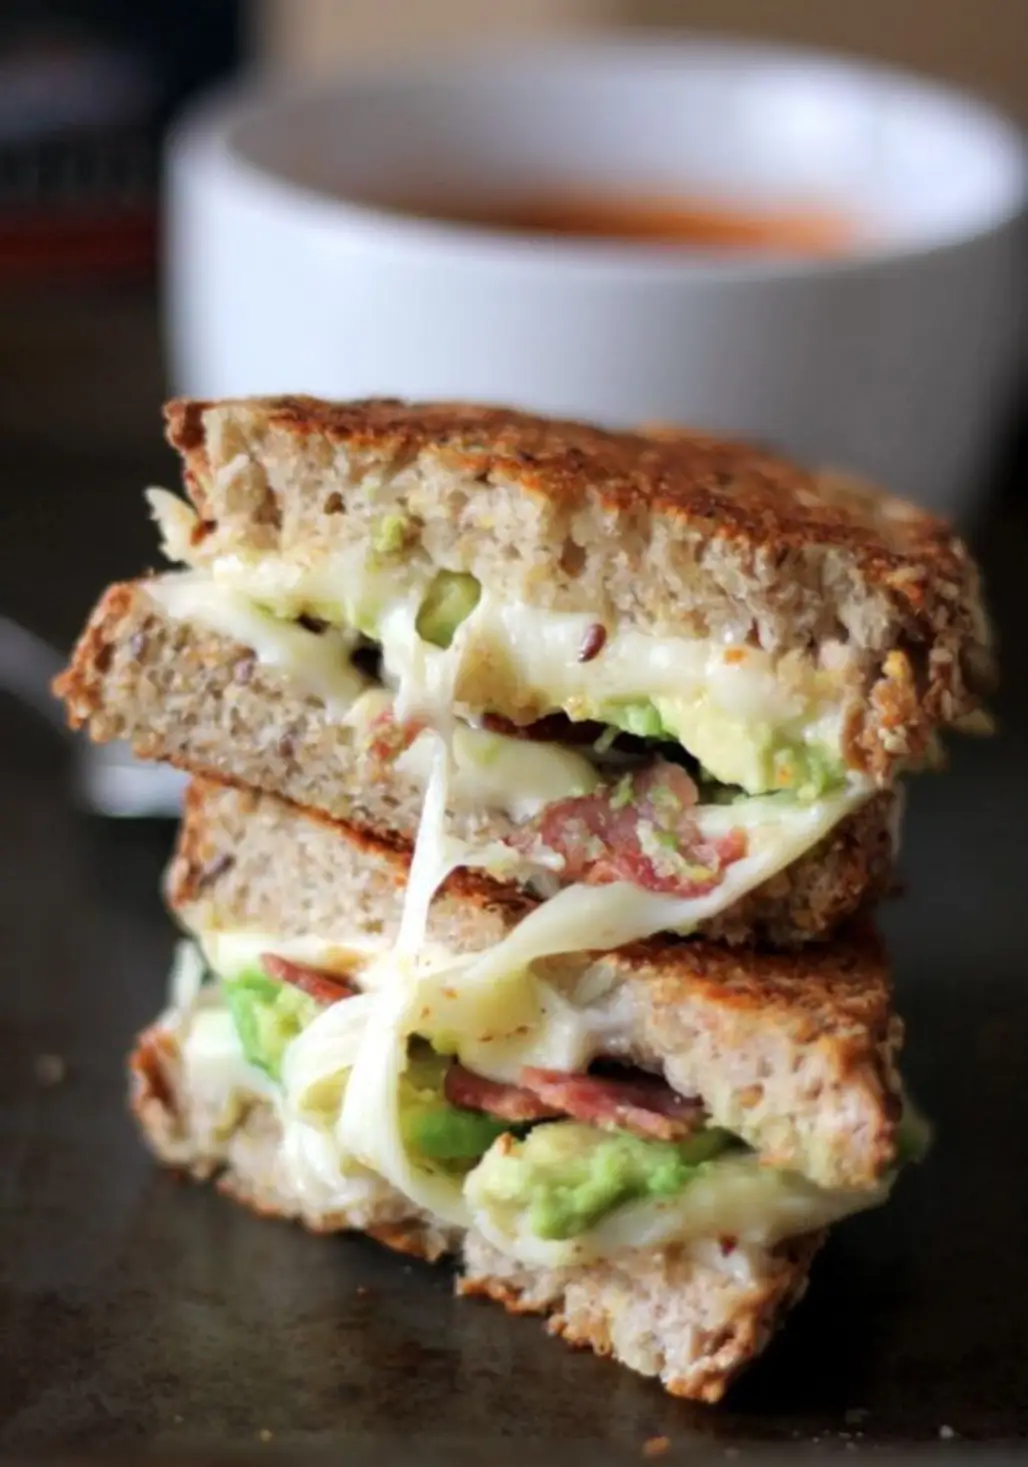 Make Grilled Cheese Healthy by Using Whole Grain Bread and Adding Veggies